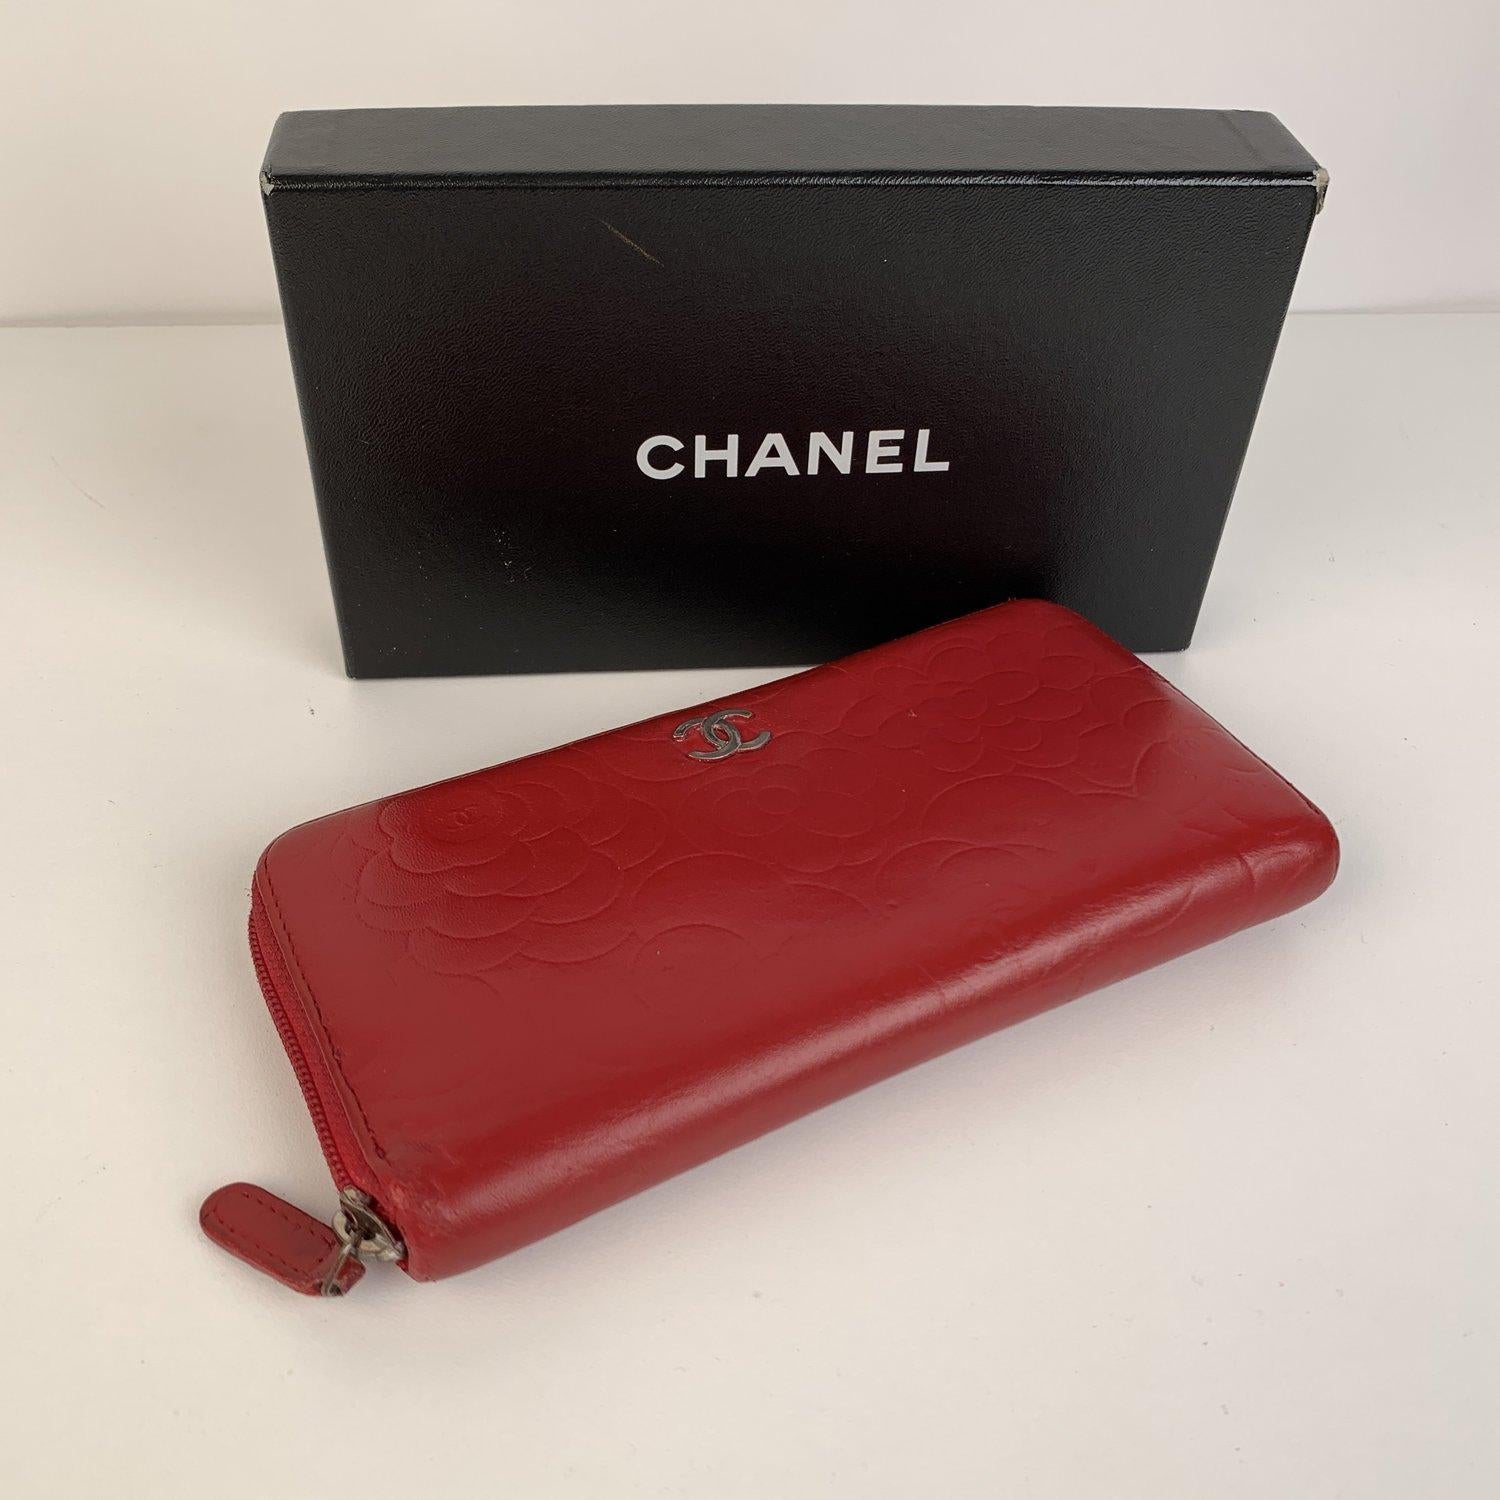 Chanel embossed Zip Around Wallet, crafted from red embossed leather with camellia flower design. Silver metal CC - CHANEL logo on the front. Zip-around closure. Pink/Purple leather interior. Inside it has 8 credit card slot, 2 open pockets, 1 zip